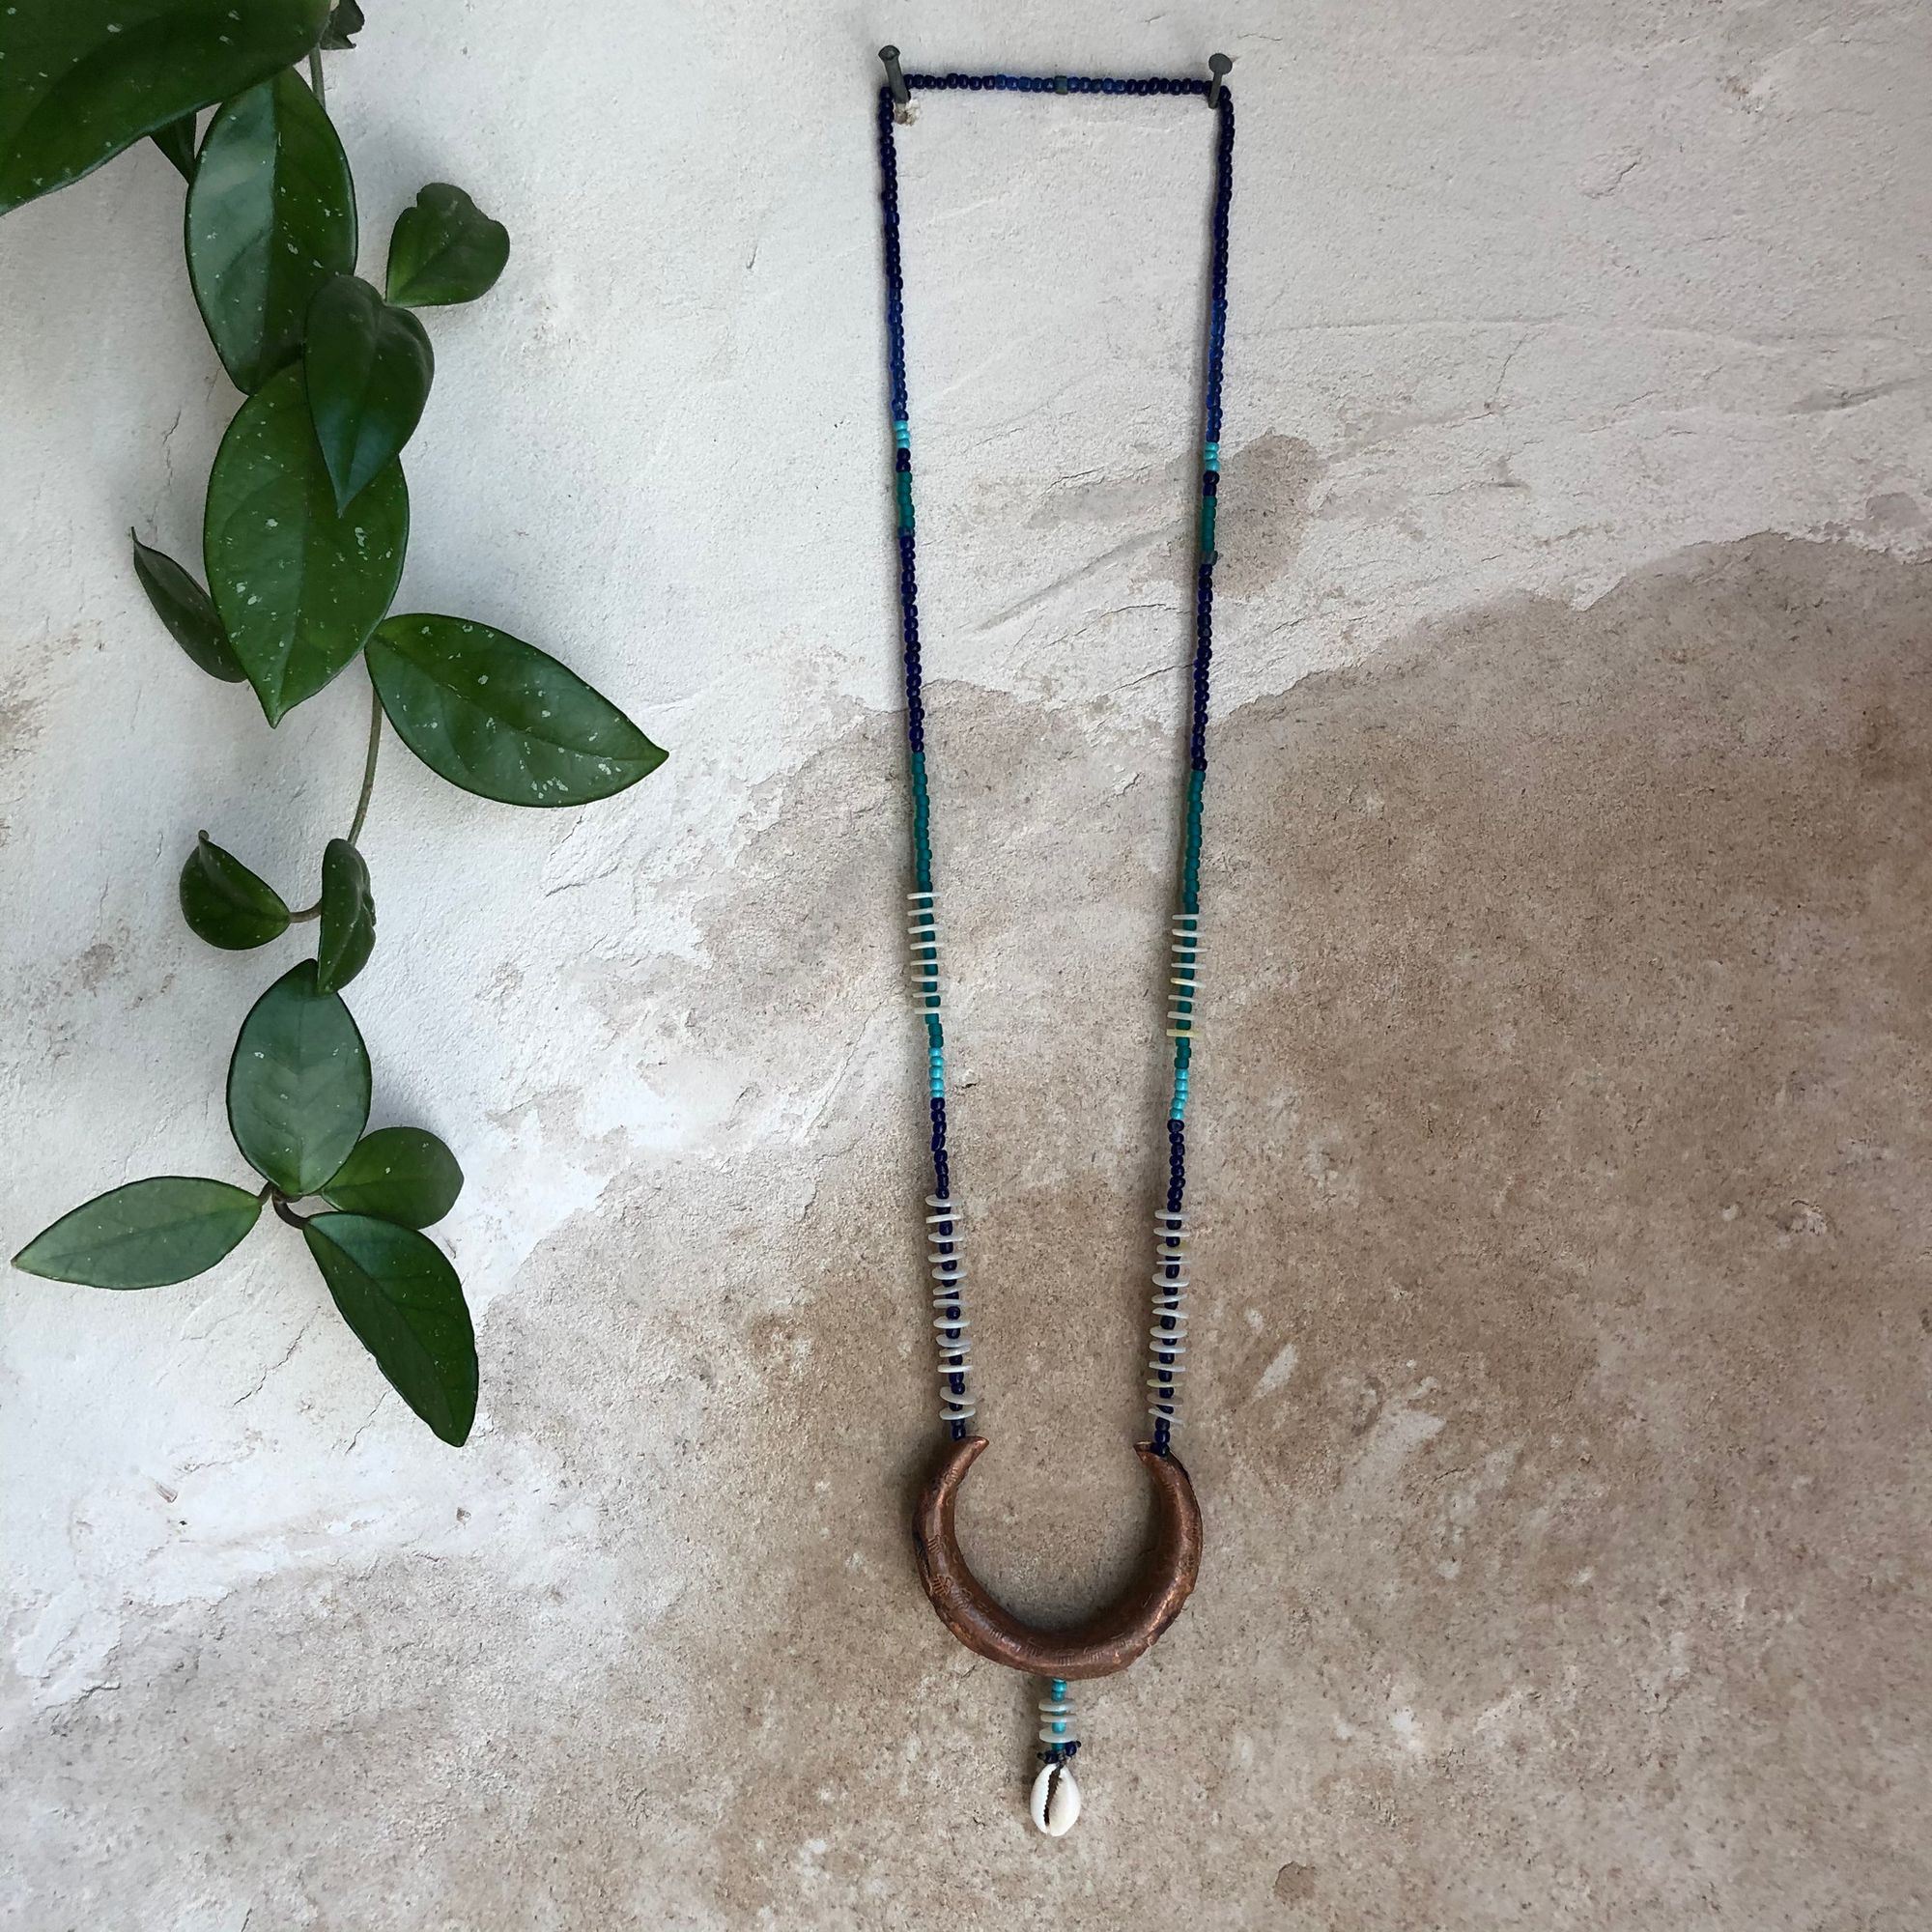  copper crescent moon necklace with blue beads hanging on a wall